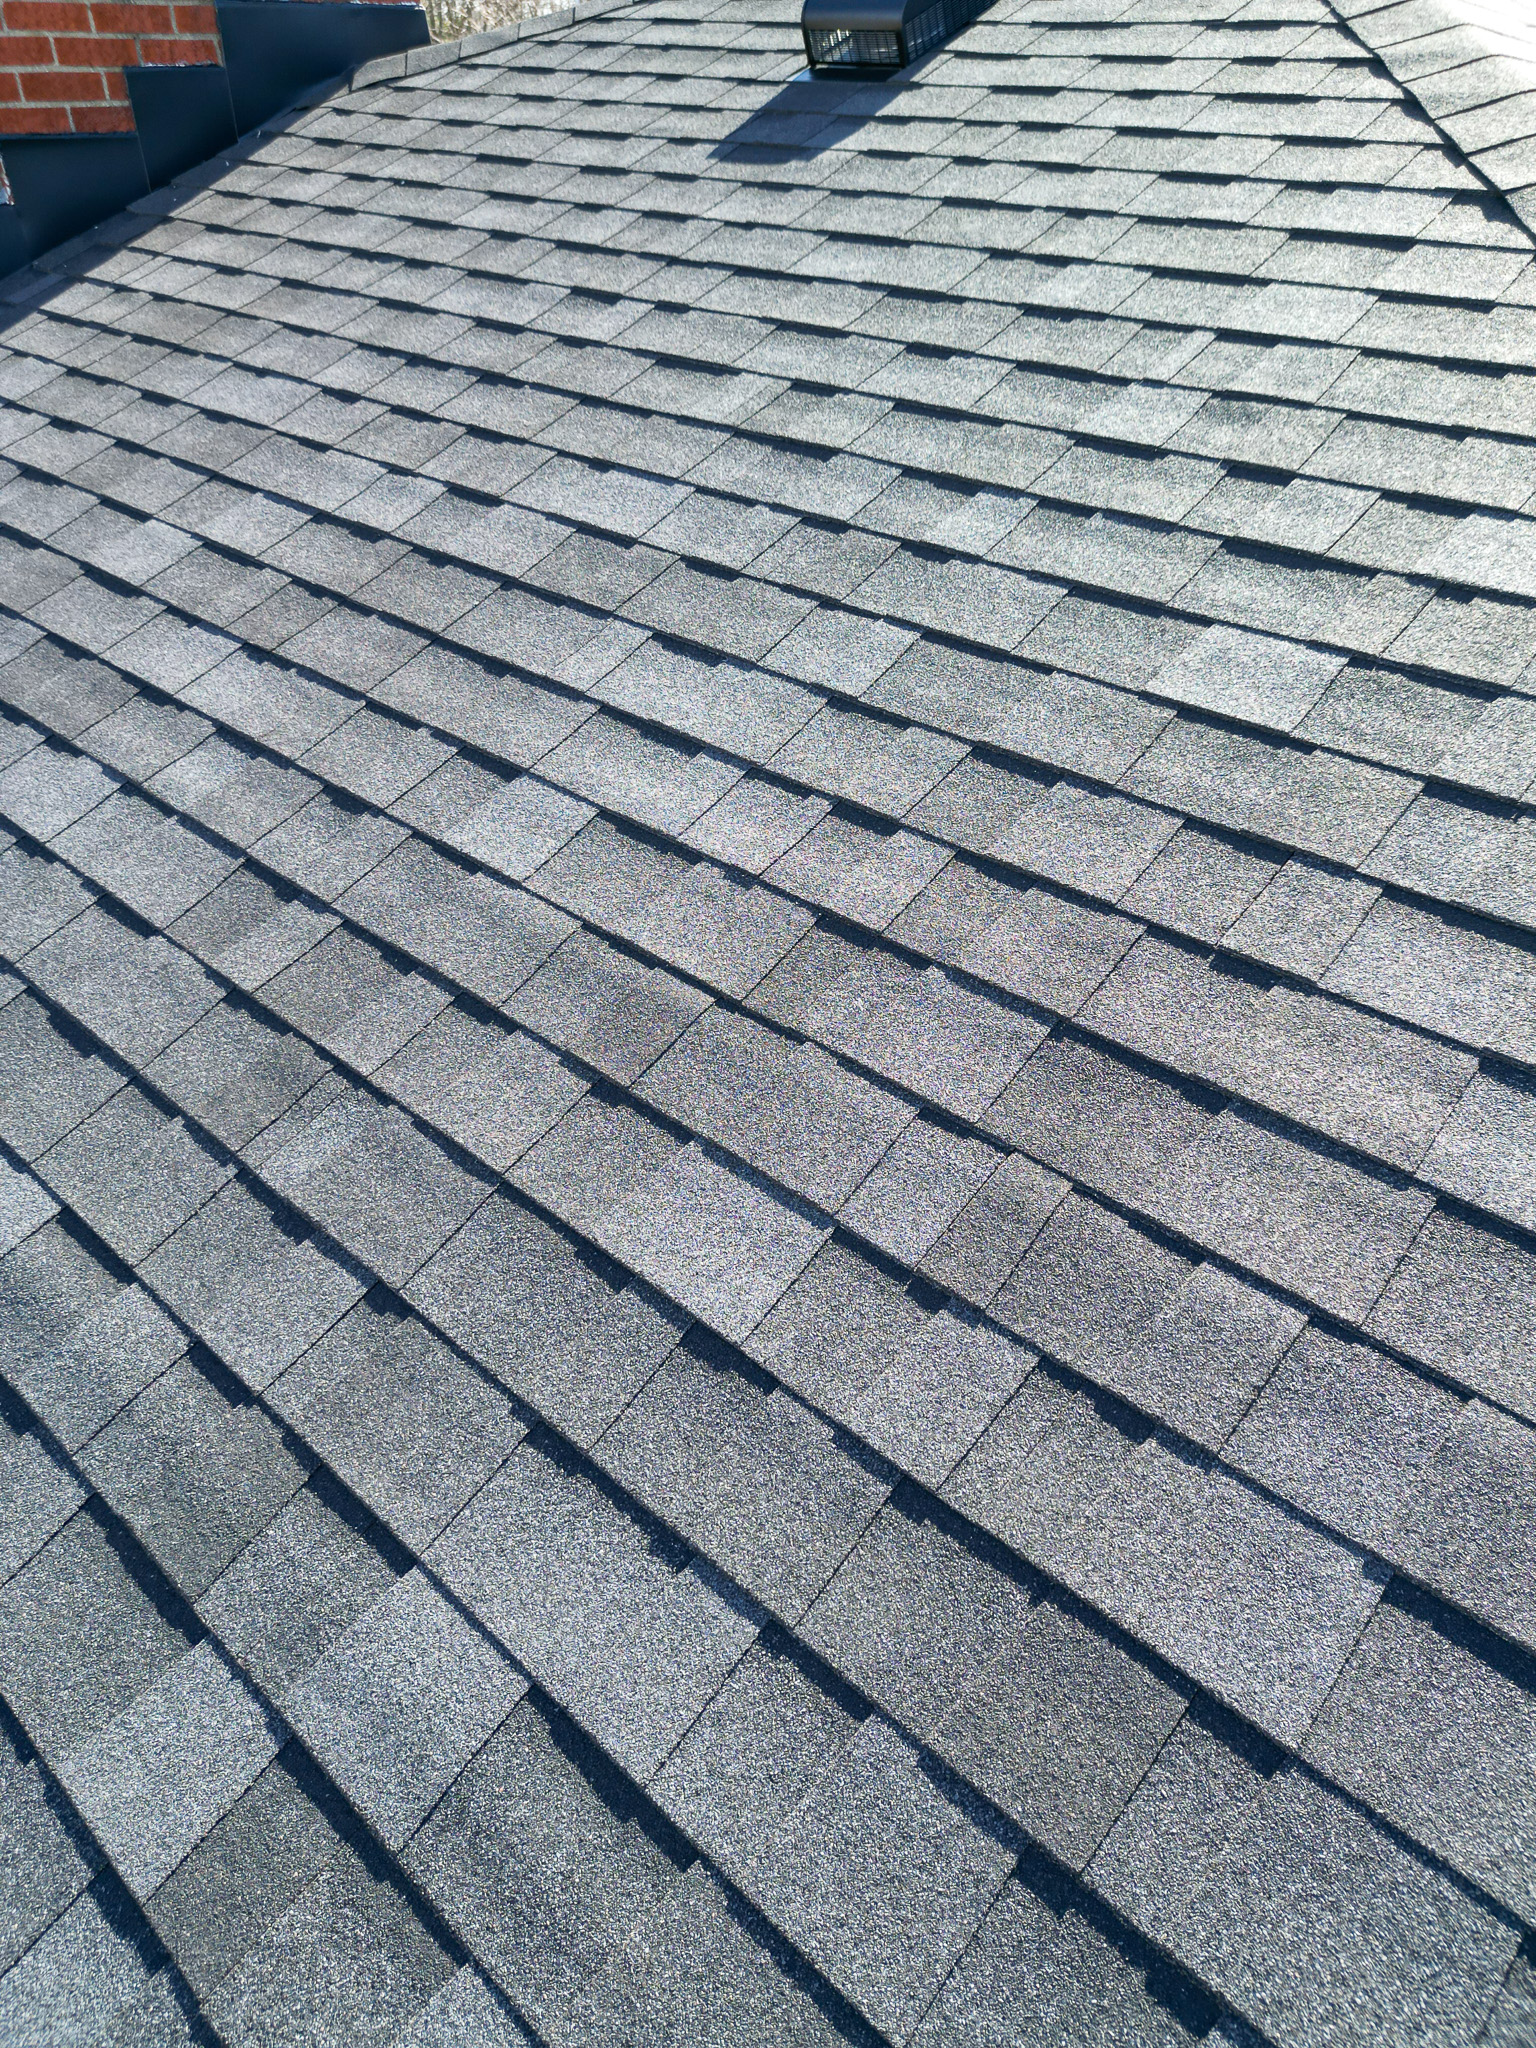 The Cost of Neglect: Why Timely Roof Repairs Save Money